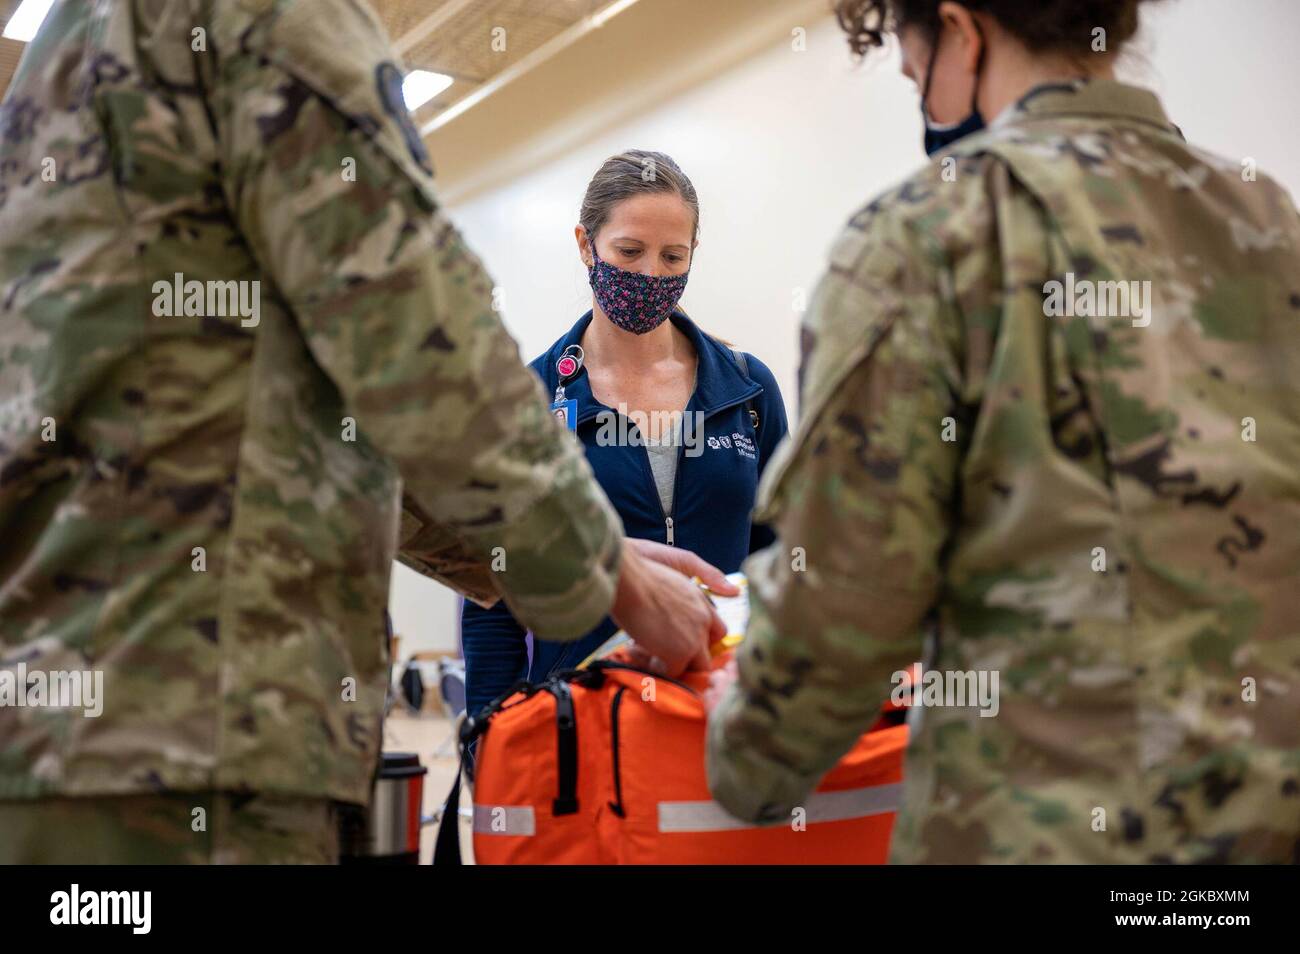 Nicole Nee, a case manager with Blue Cross/Blue Shield, watches a demonstration of first aid equipment at the vaccine dispensation site at he Minneapolis-St. Paul Air Reserve Station, March 7, 2021. First aid is available in the event a patient who has received the vaccine should develop a negative reaction. Stock Photo